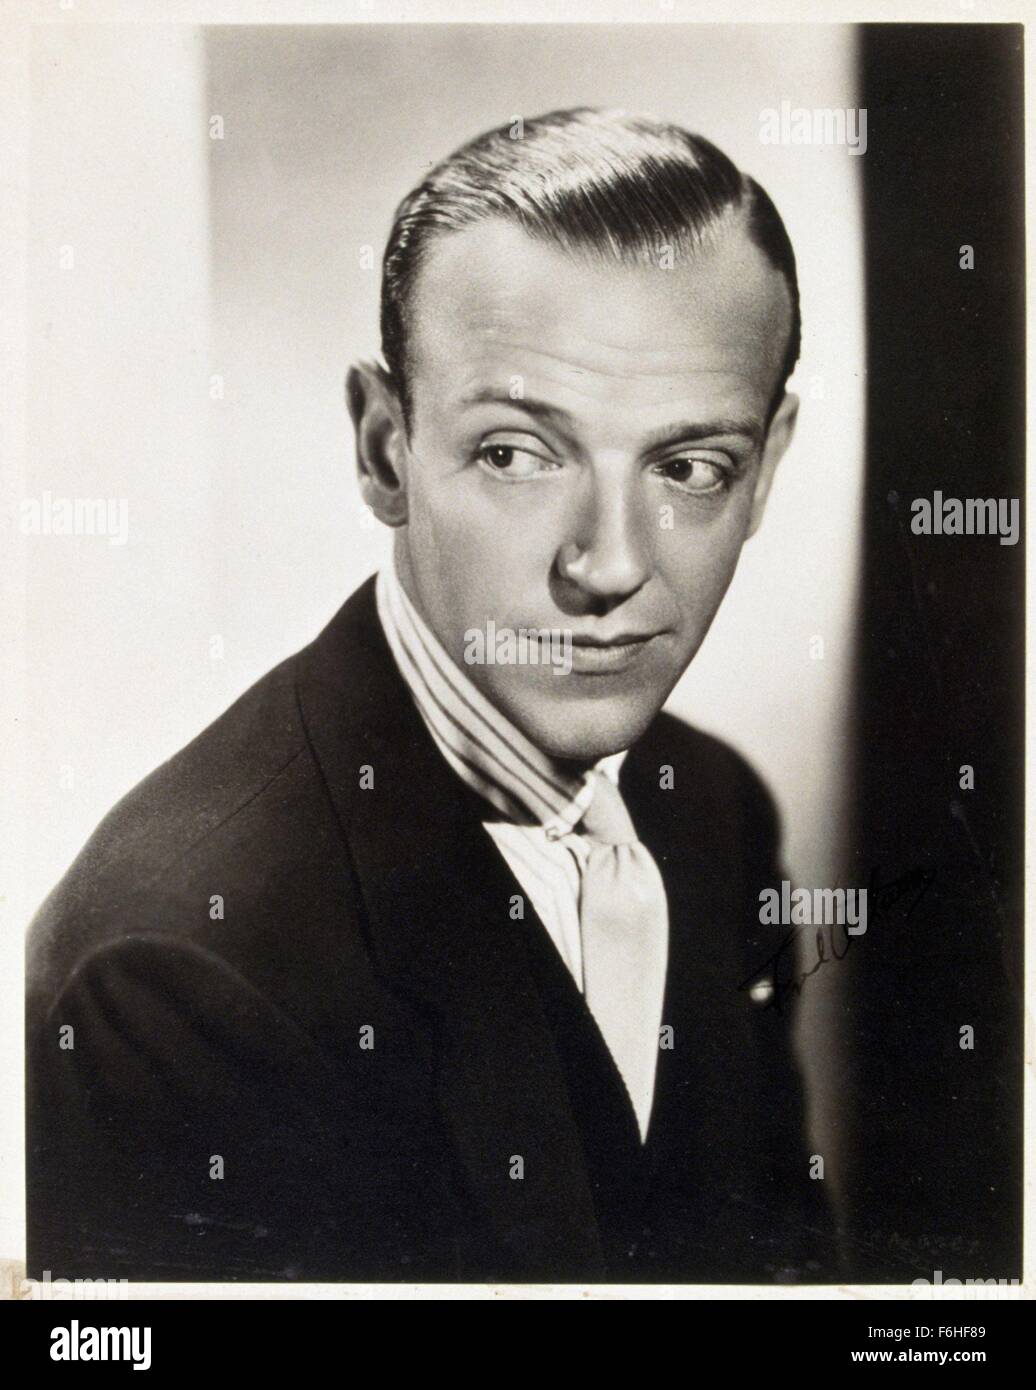 1937, Film Title: SHALL WE DANCE, Director: MARK SANDRICH, Studio: RKO, Pictured: FRED ASTAIRE. (Credit Image: SNAP) Stock Photo